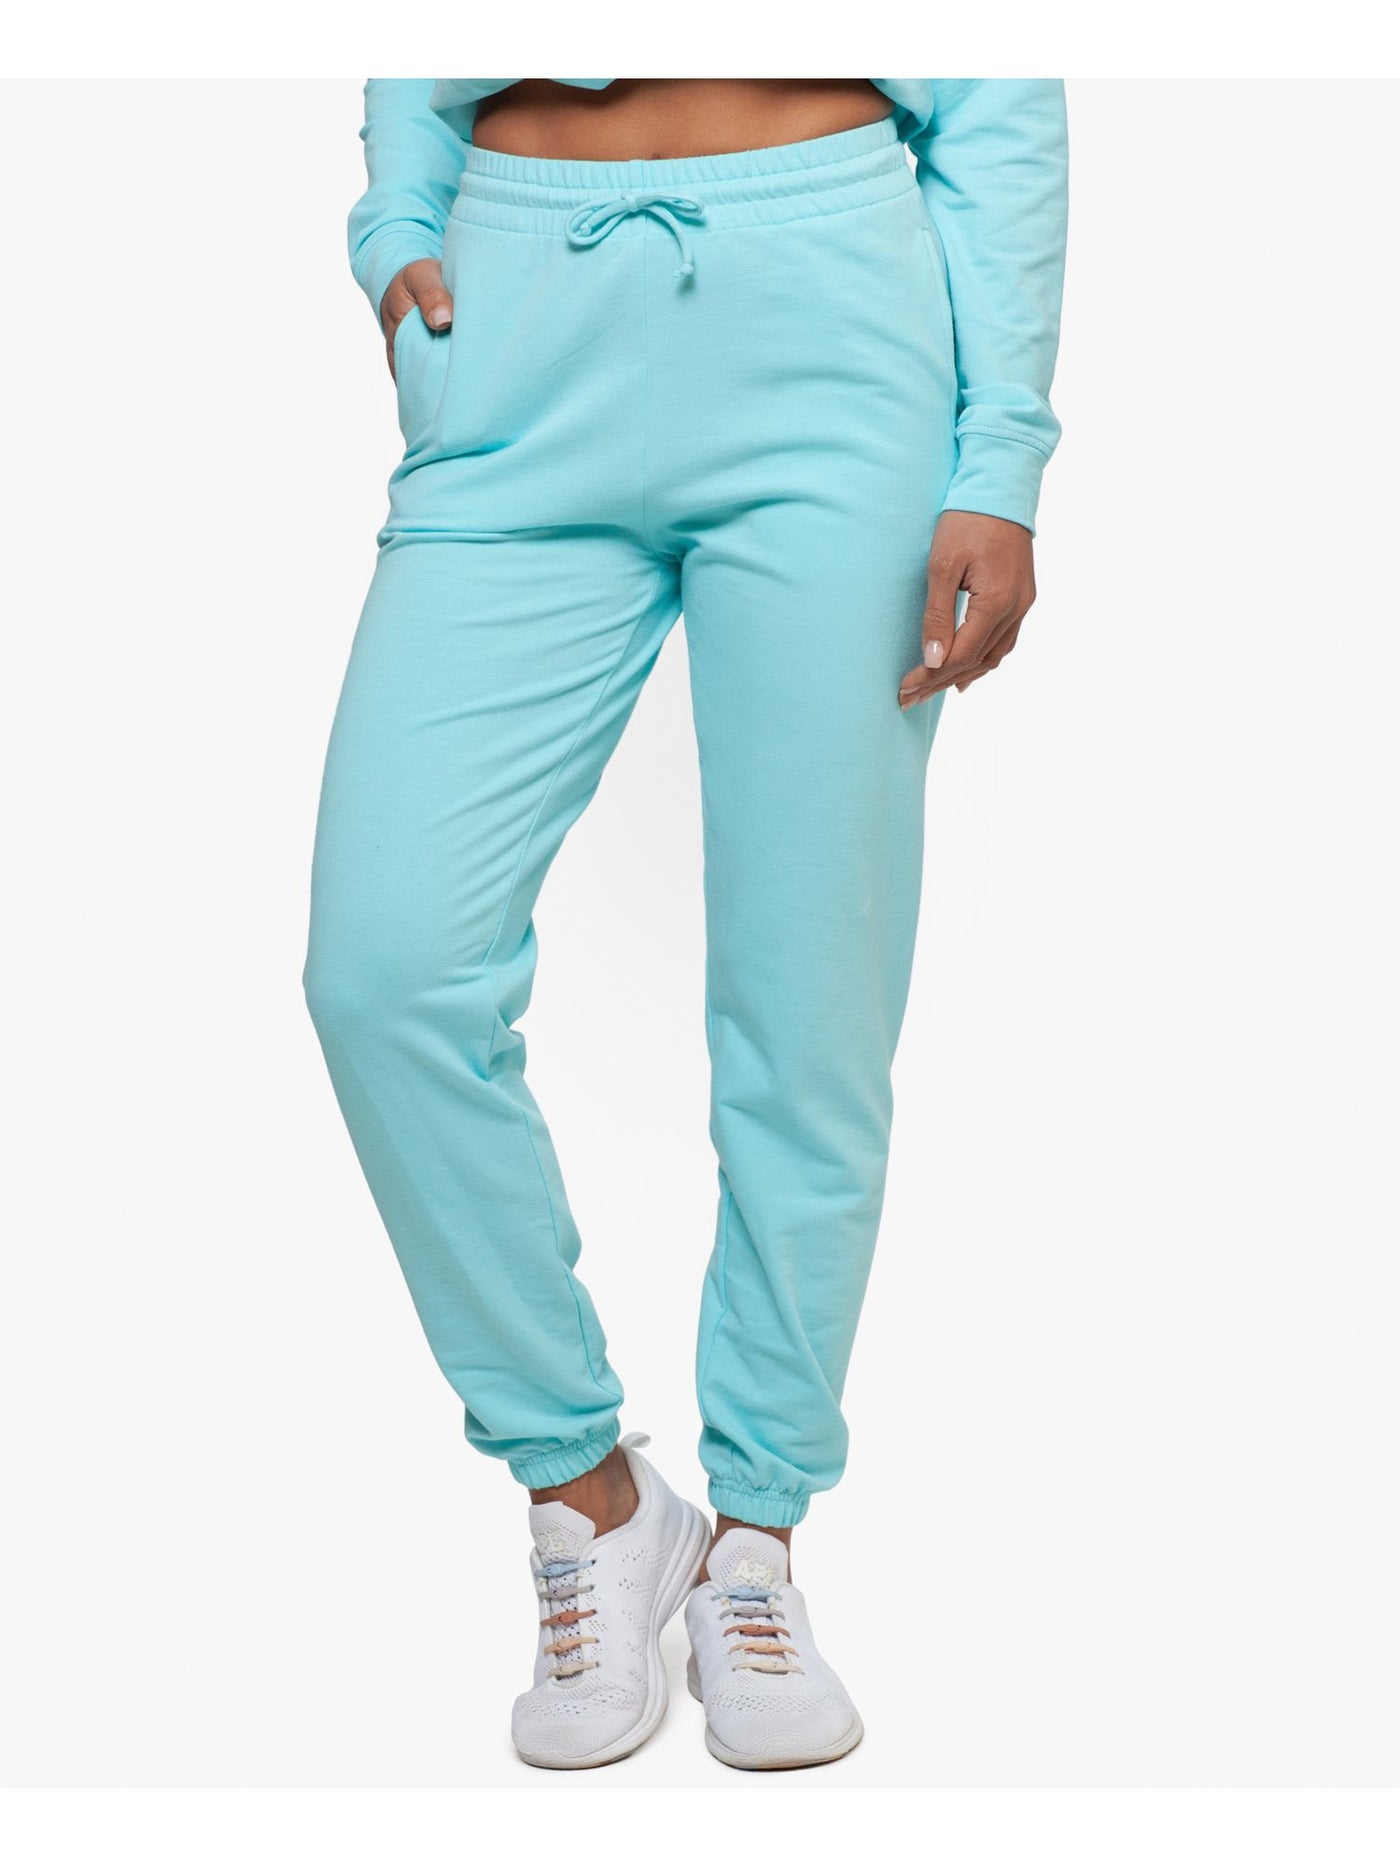 BAM BY BETSY & ADAM Womens Aqua Stretch Pocketed Draw String Waist, Tapered Lounge Pants M